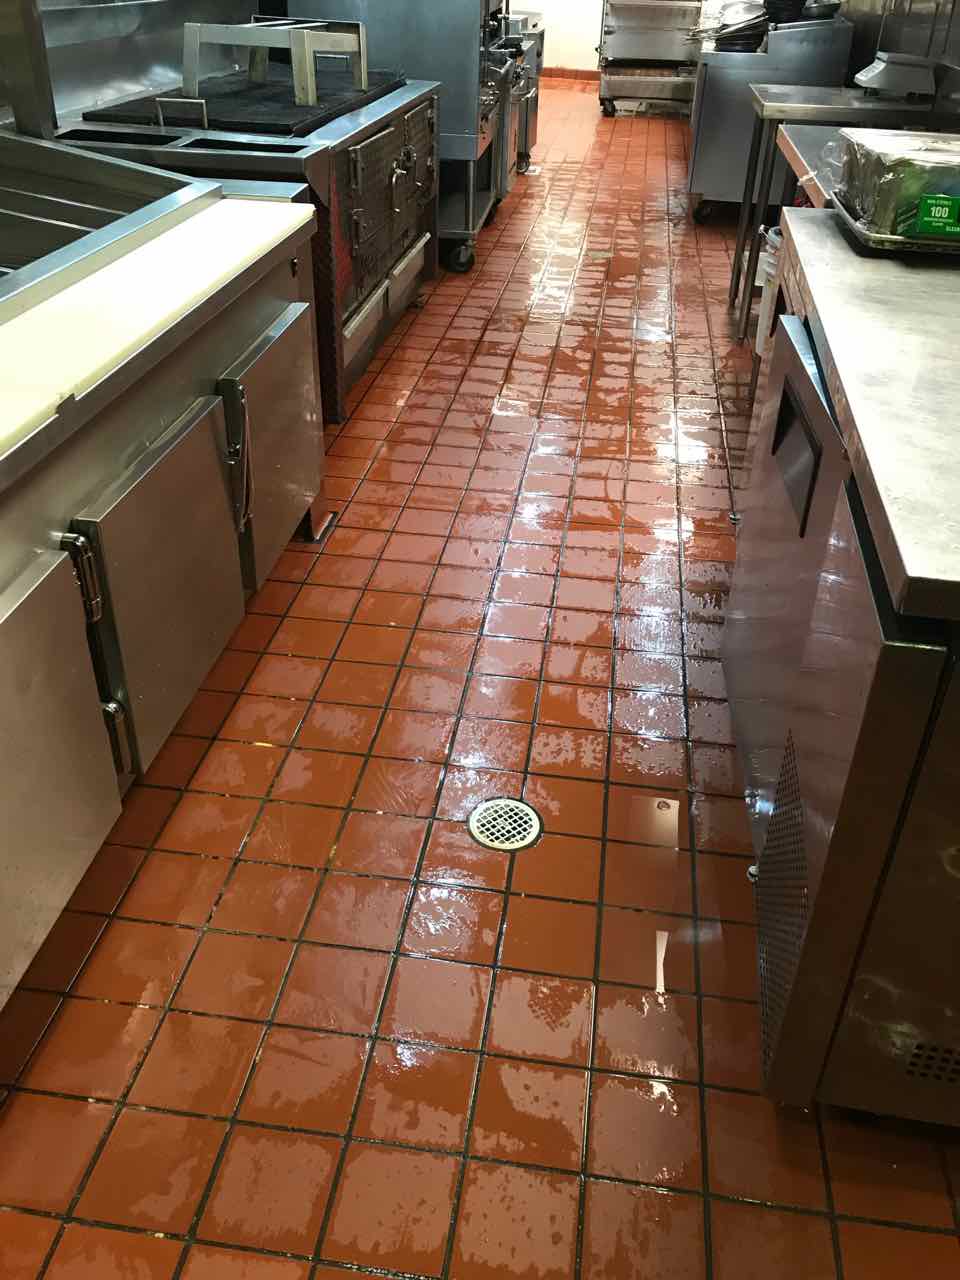  Commercial flooring repairs and upgrade for brand restaurant needing maintenance and upkeep. 